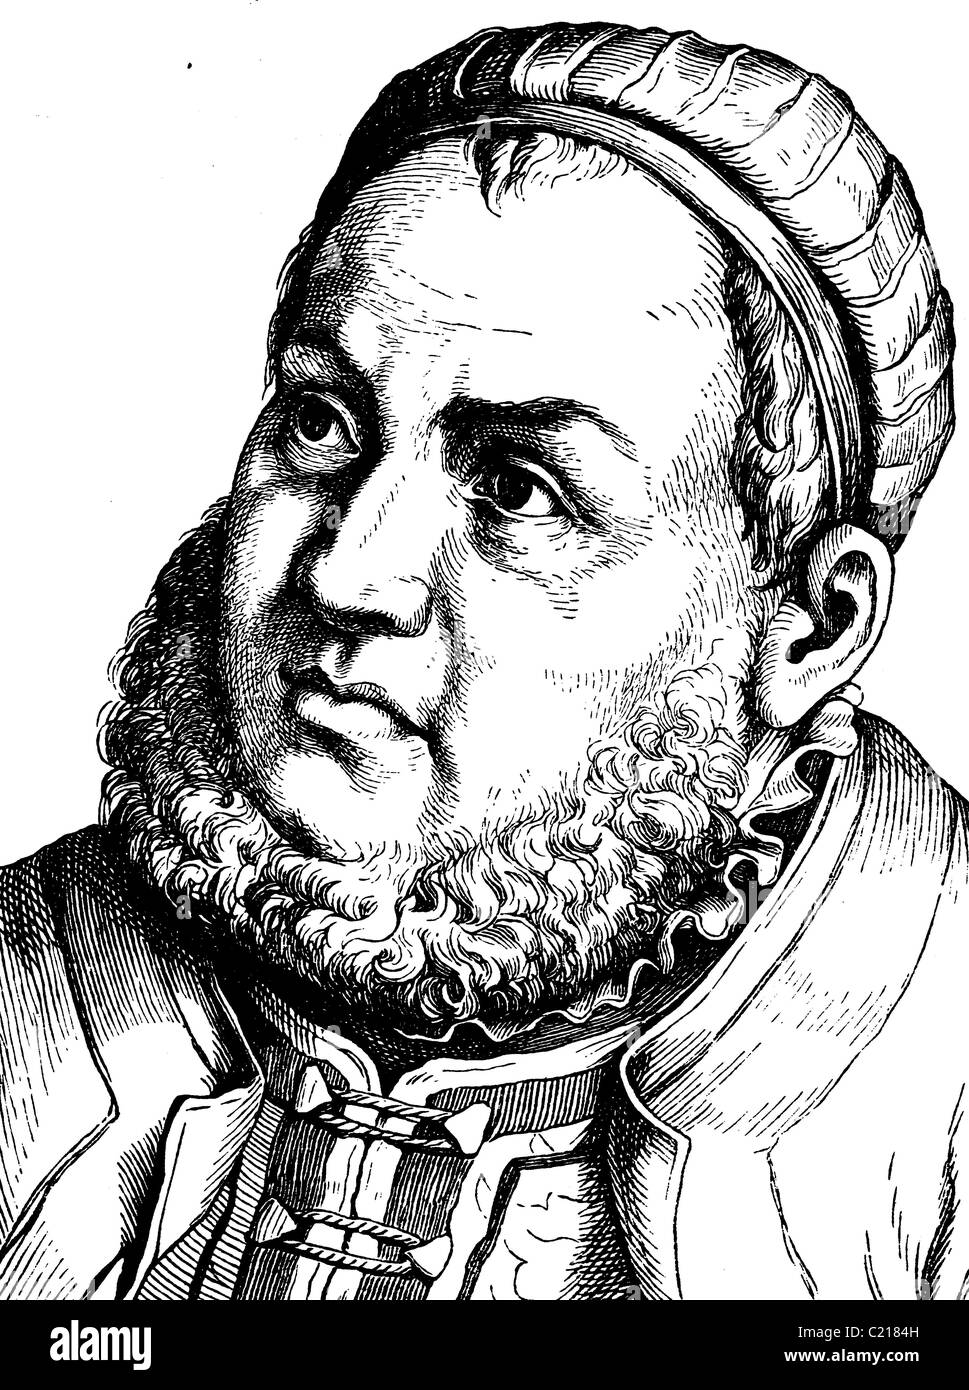 Digital improved image of Johann Friedrich the Magnanimous, Elector and Duke of Saxony, 1503 - 1554 Stock Photo